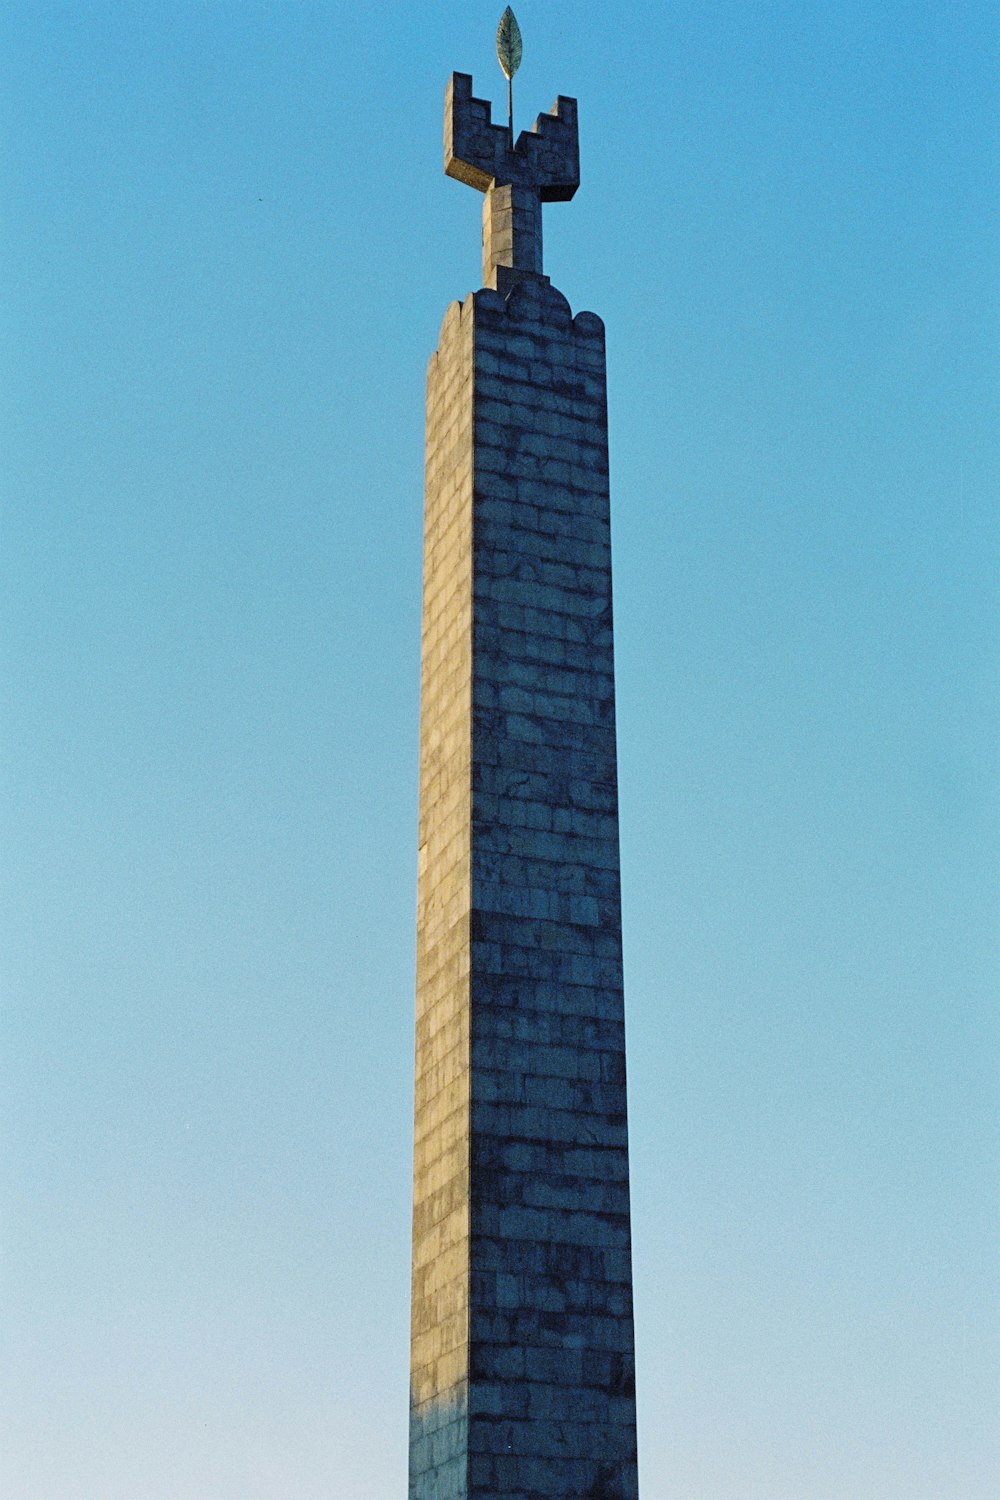 a tall monument with a cross on top of it